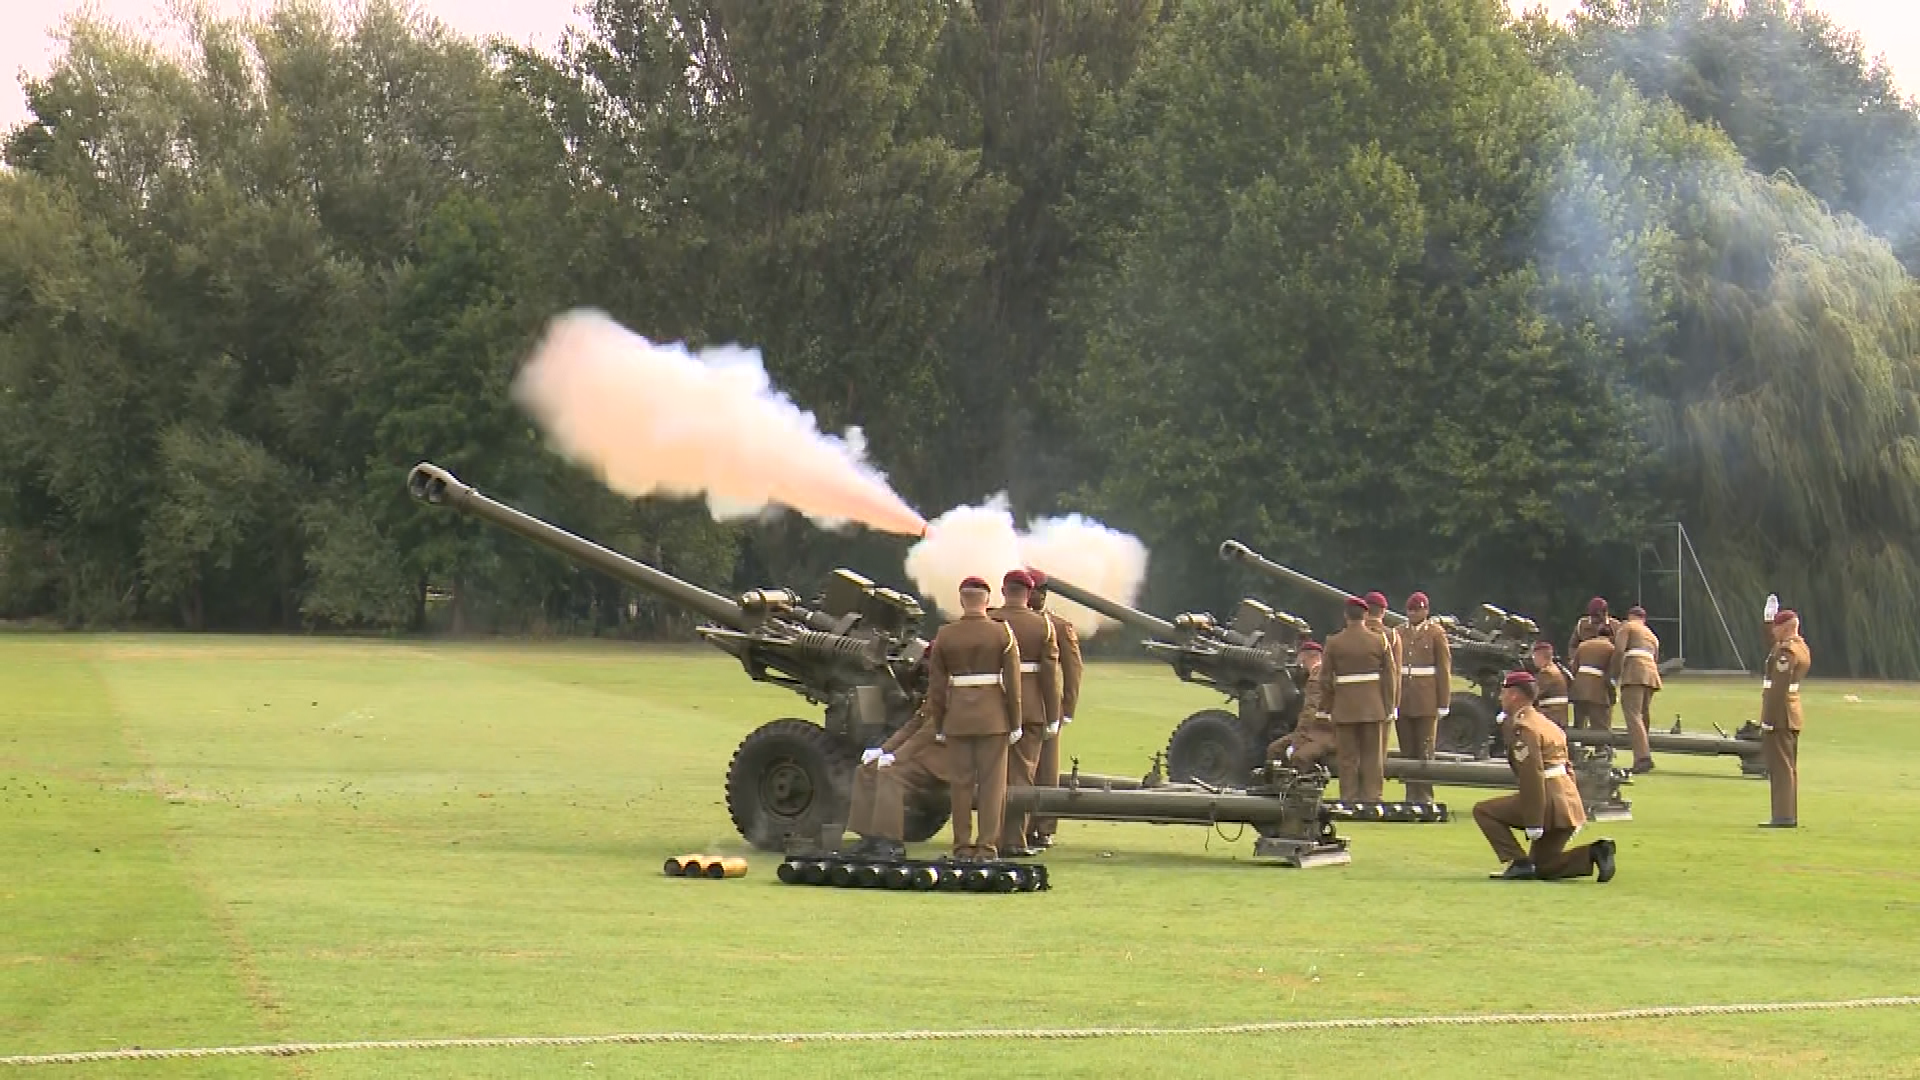 PICTURES: 'A great honour' says commander after historic gun salute in York